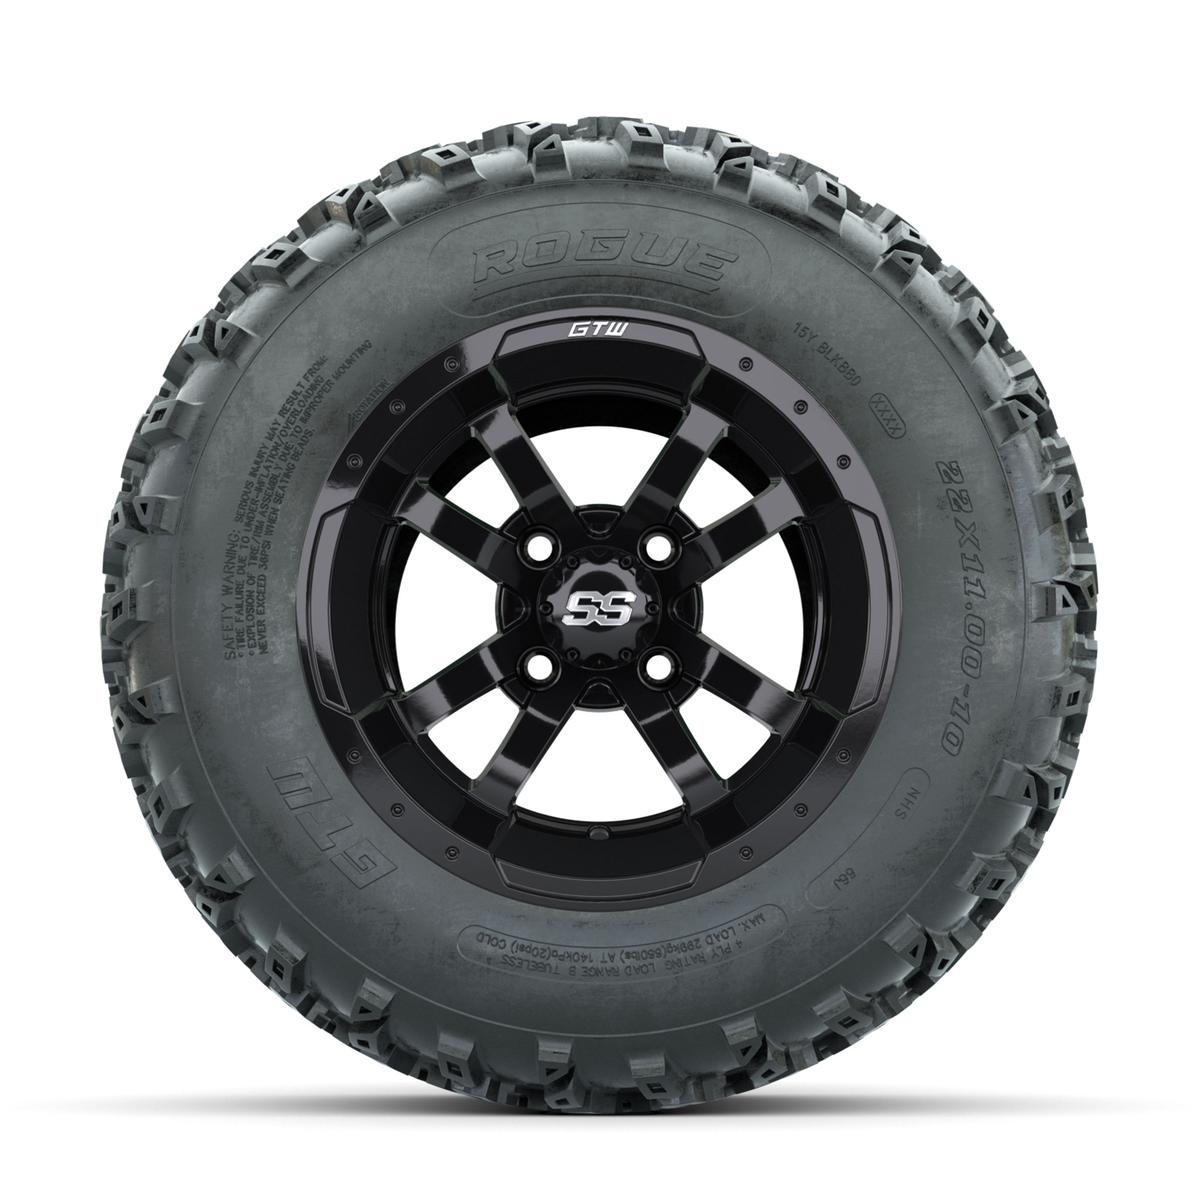 GTW Storm Trooper Black 10 in Wheels with 22x11.00-10 Rogue All Terrain Tires – Full Set